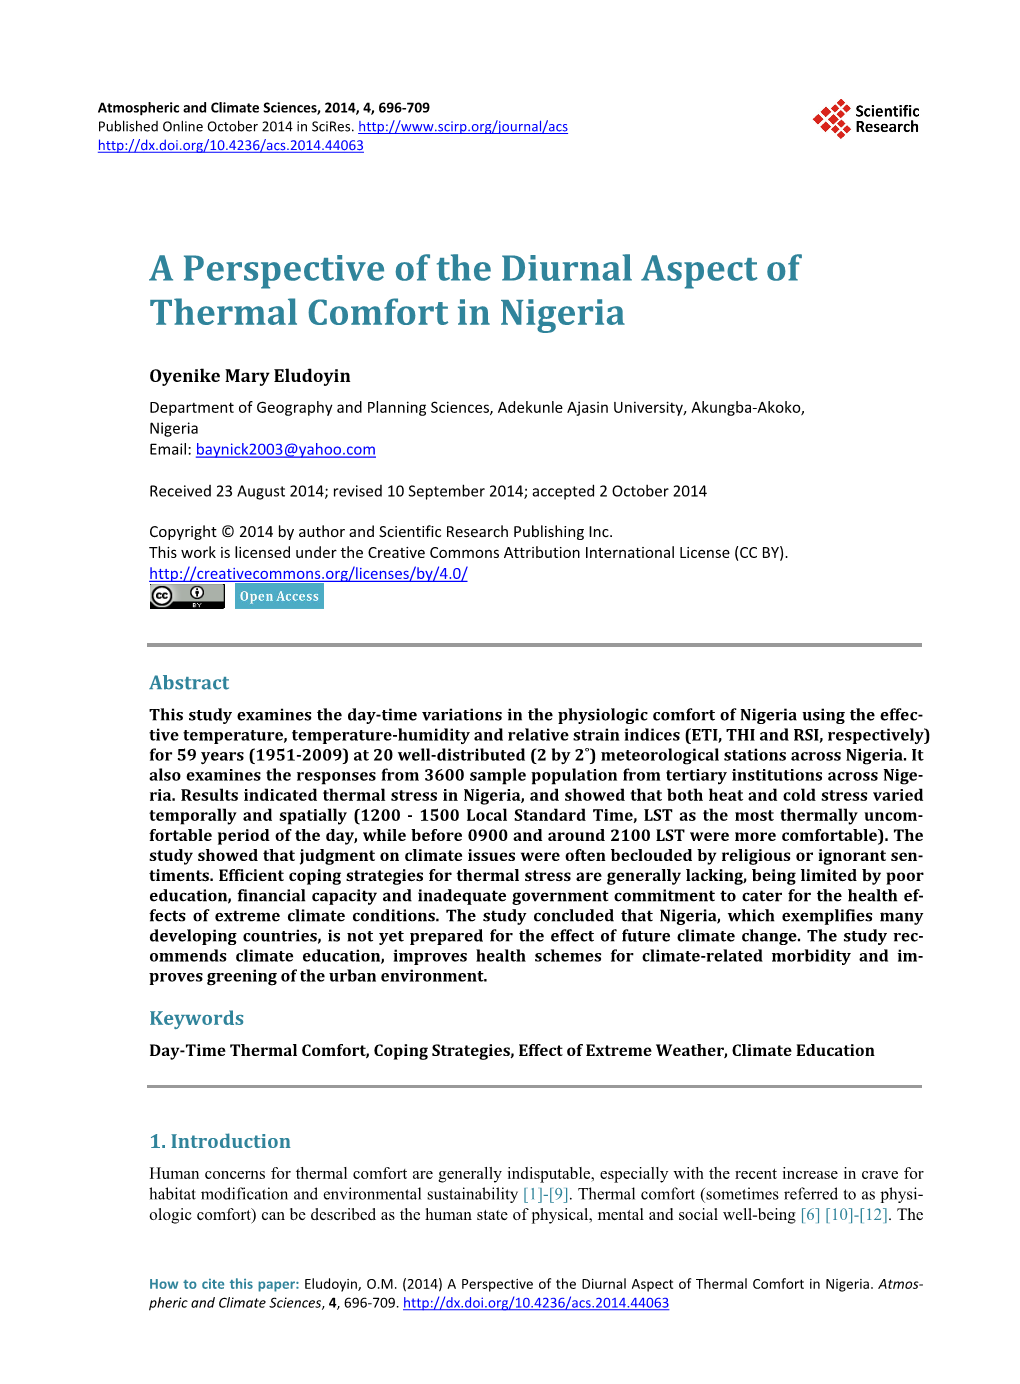 A Perspective of the Diurnal Aspect of Thermal Comfort in Nigeria